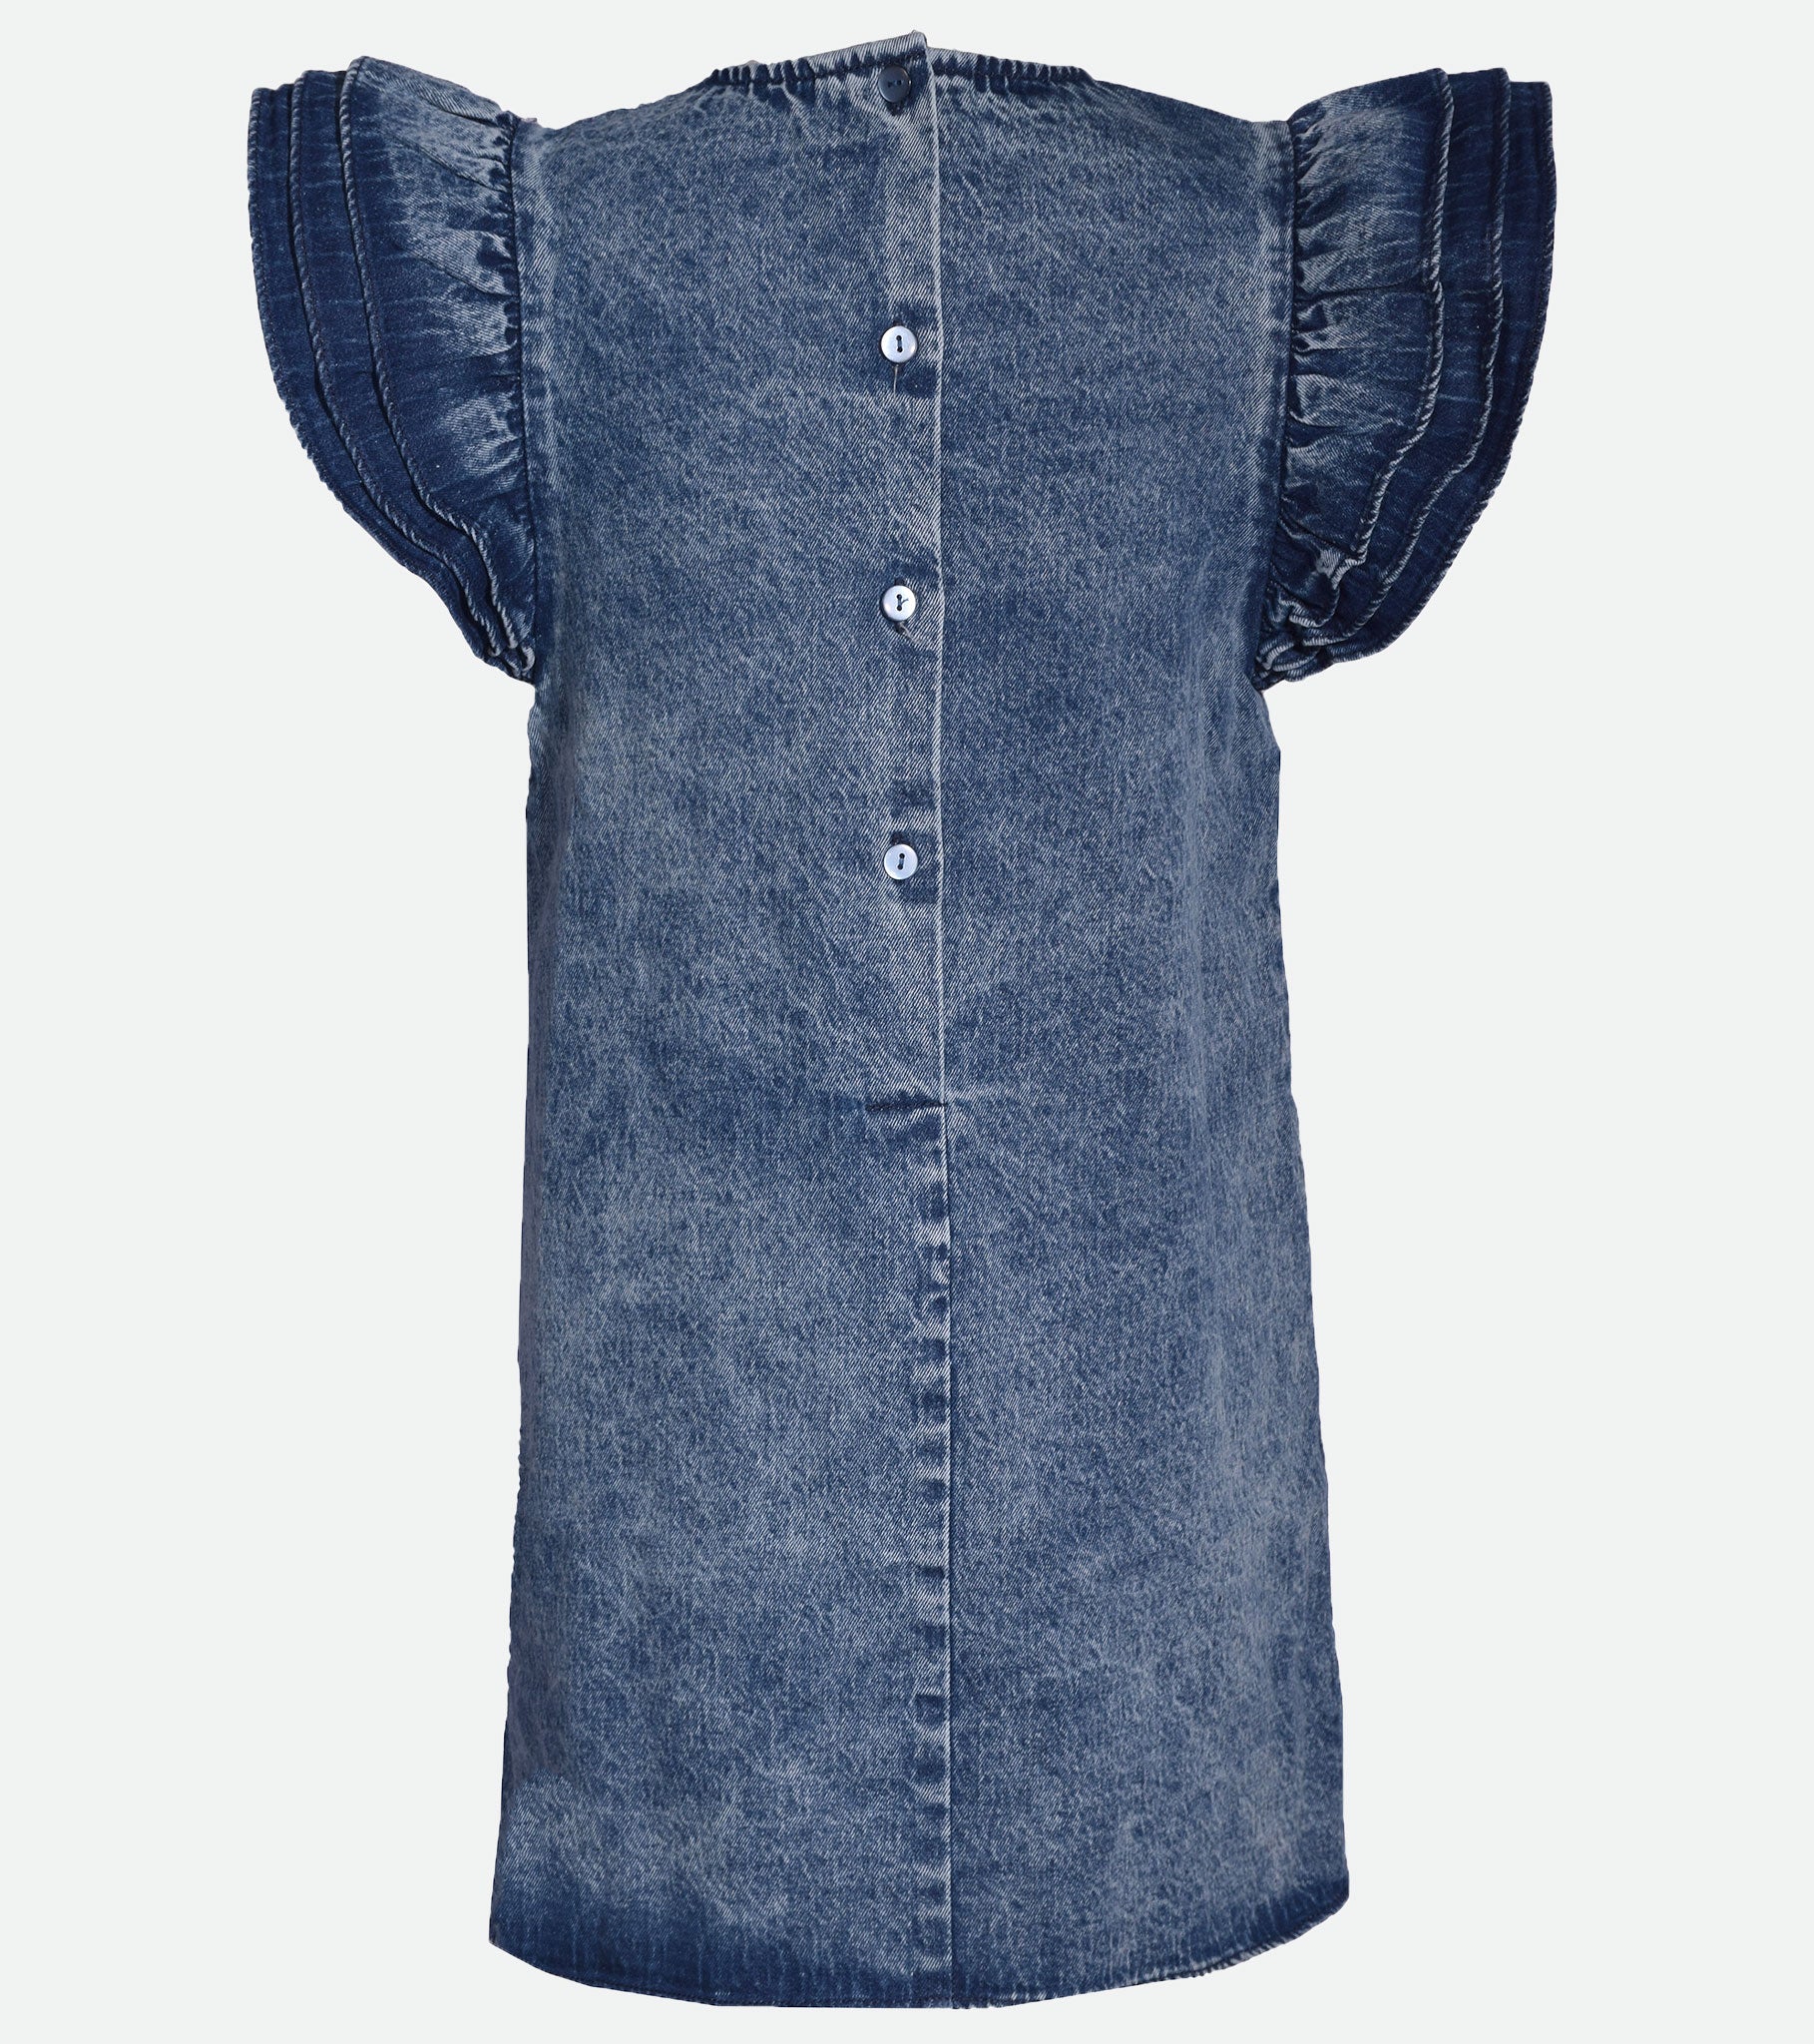 Baby Girl Jeans Denim Dresses Cute Fashion Double Layer Turn Down Lace  Collars Kids Dress For Toddler Girls From Zzj8, $16.09 | DHgate.Com